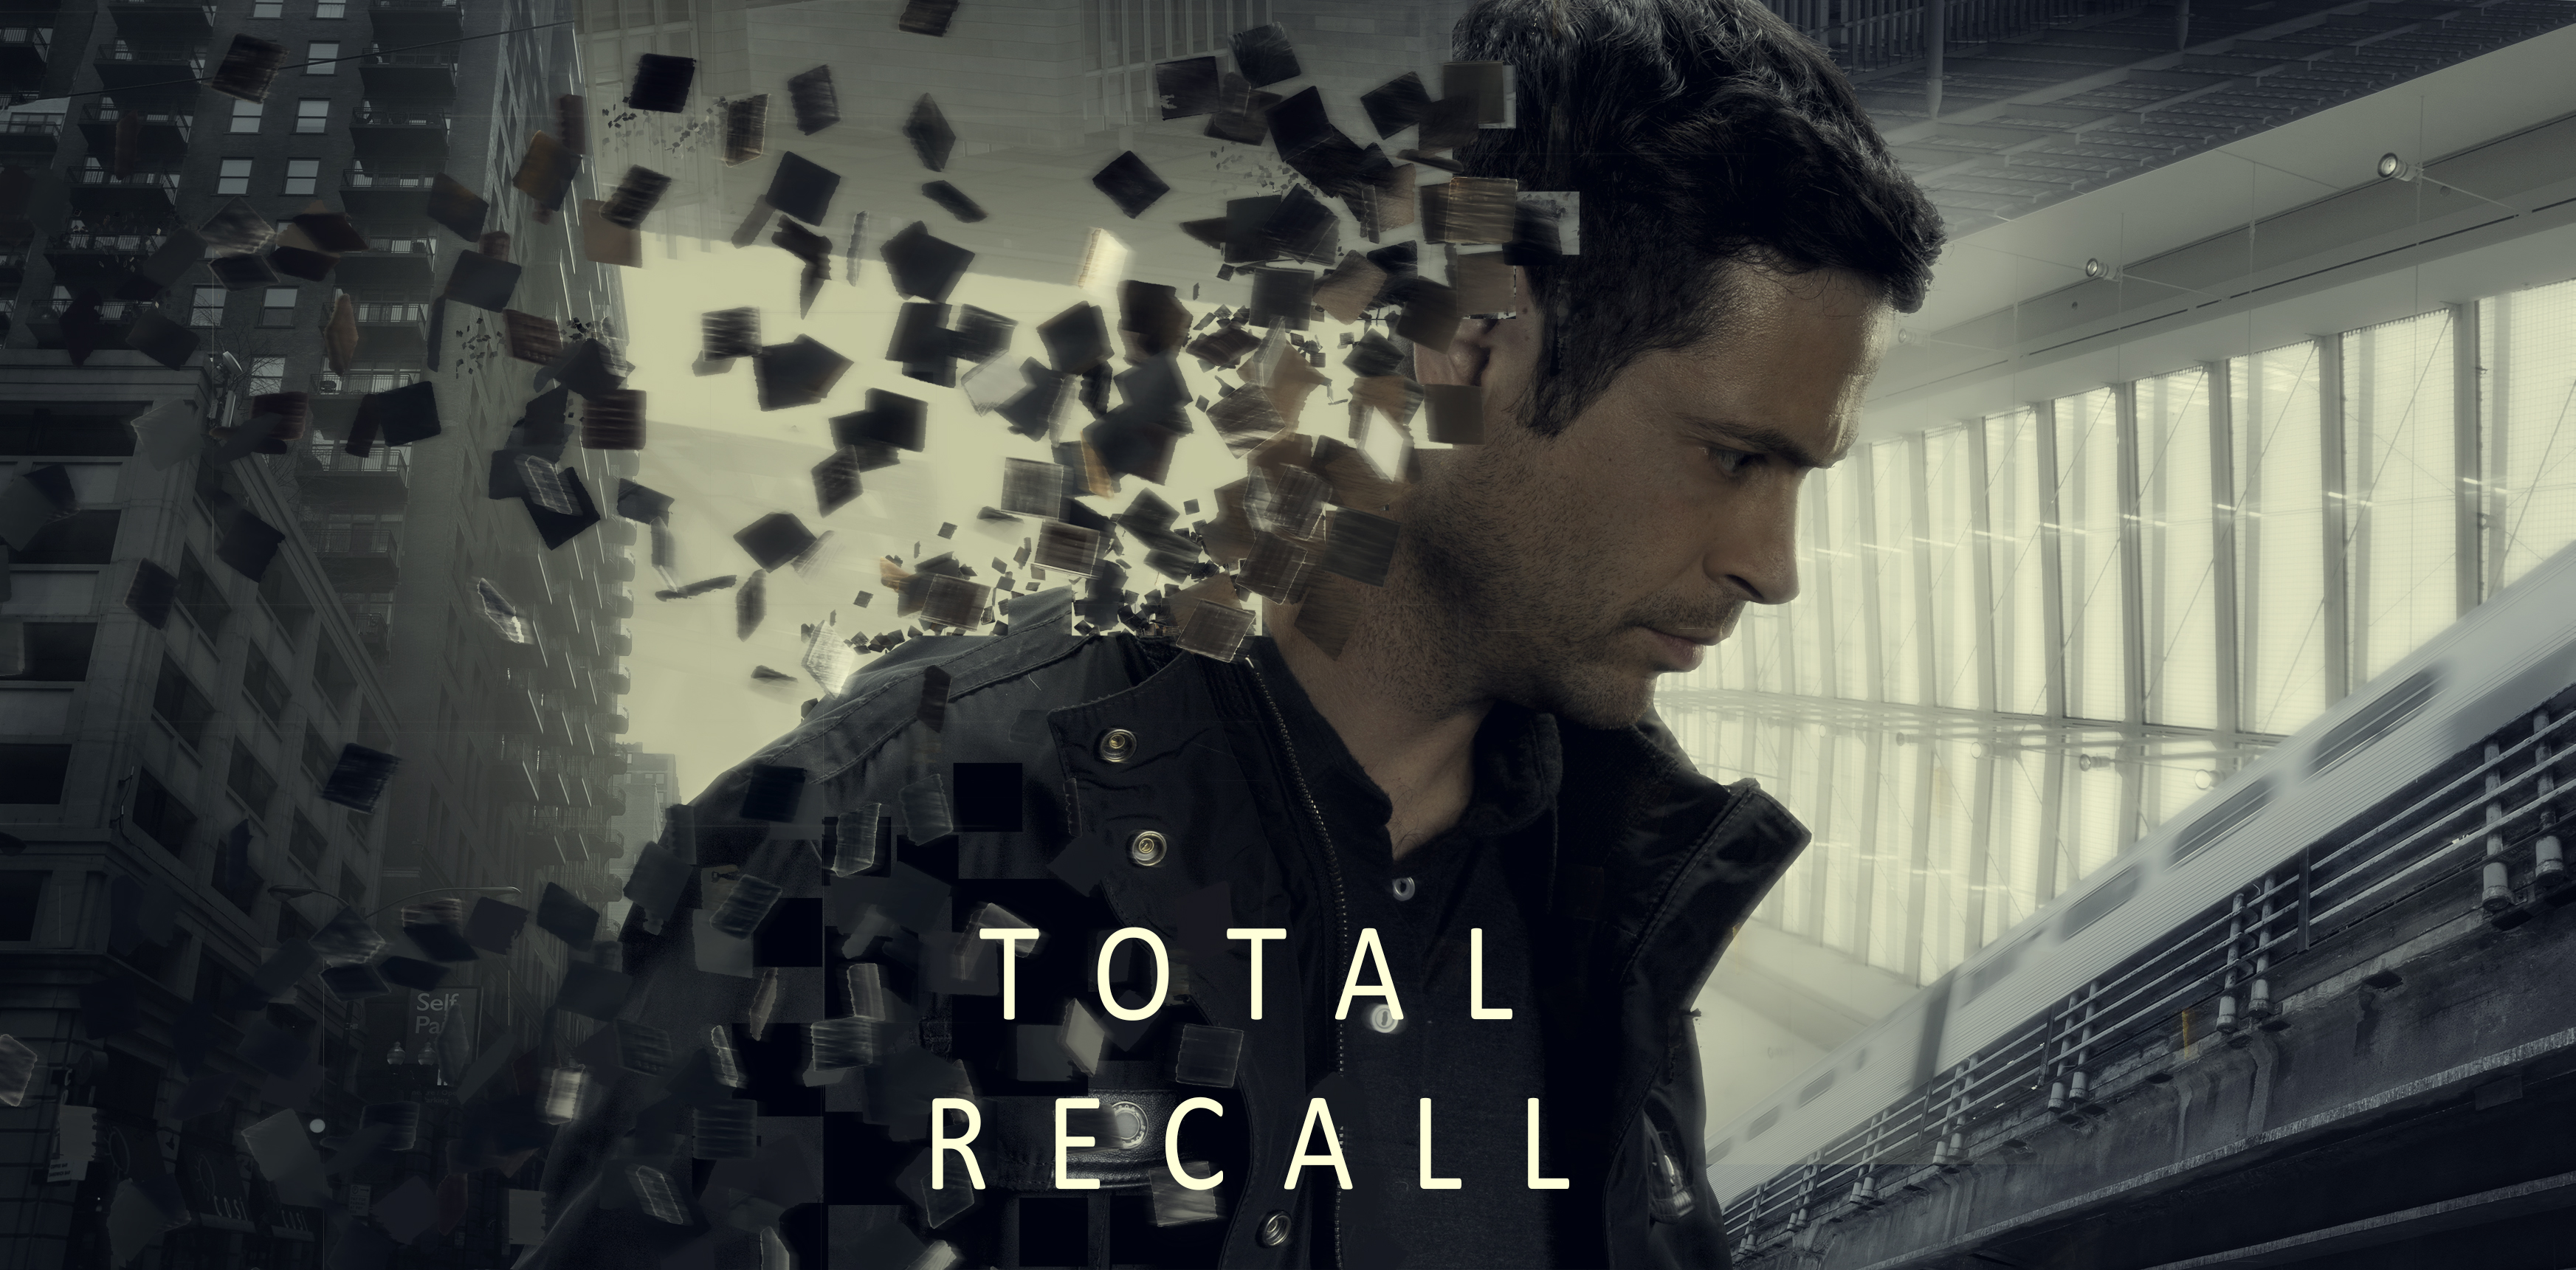 HQ Total Recall Wallpapers | File 2600.68Kb